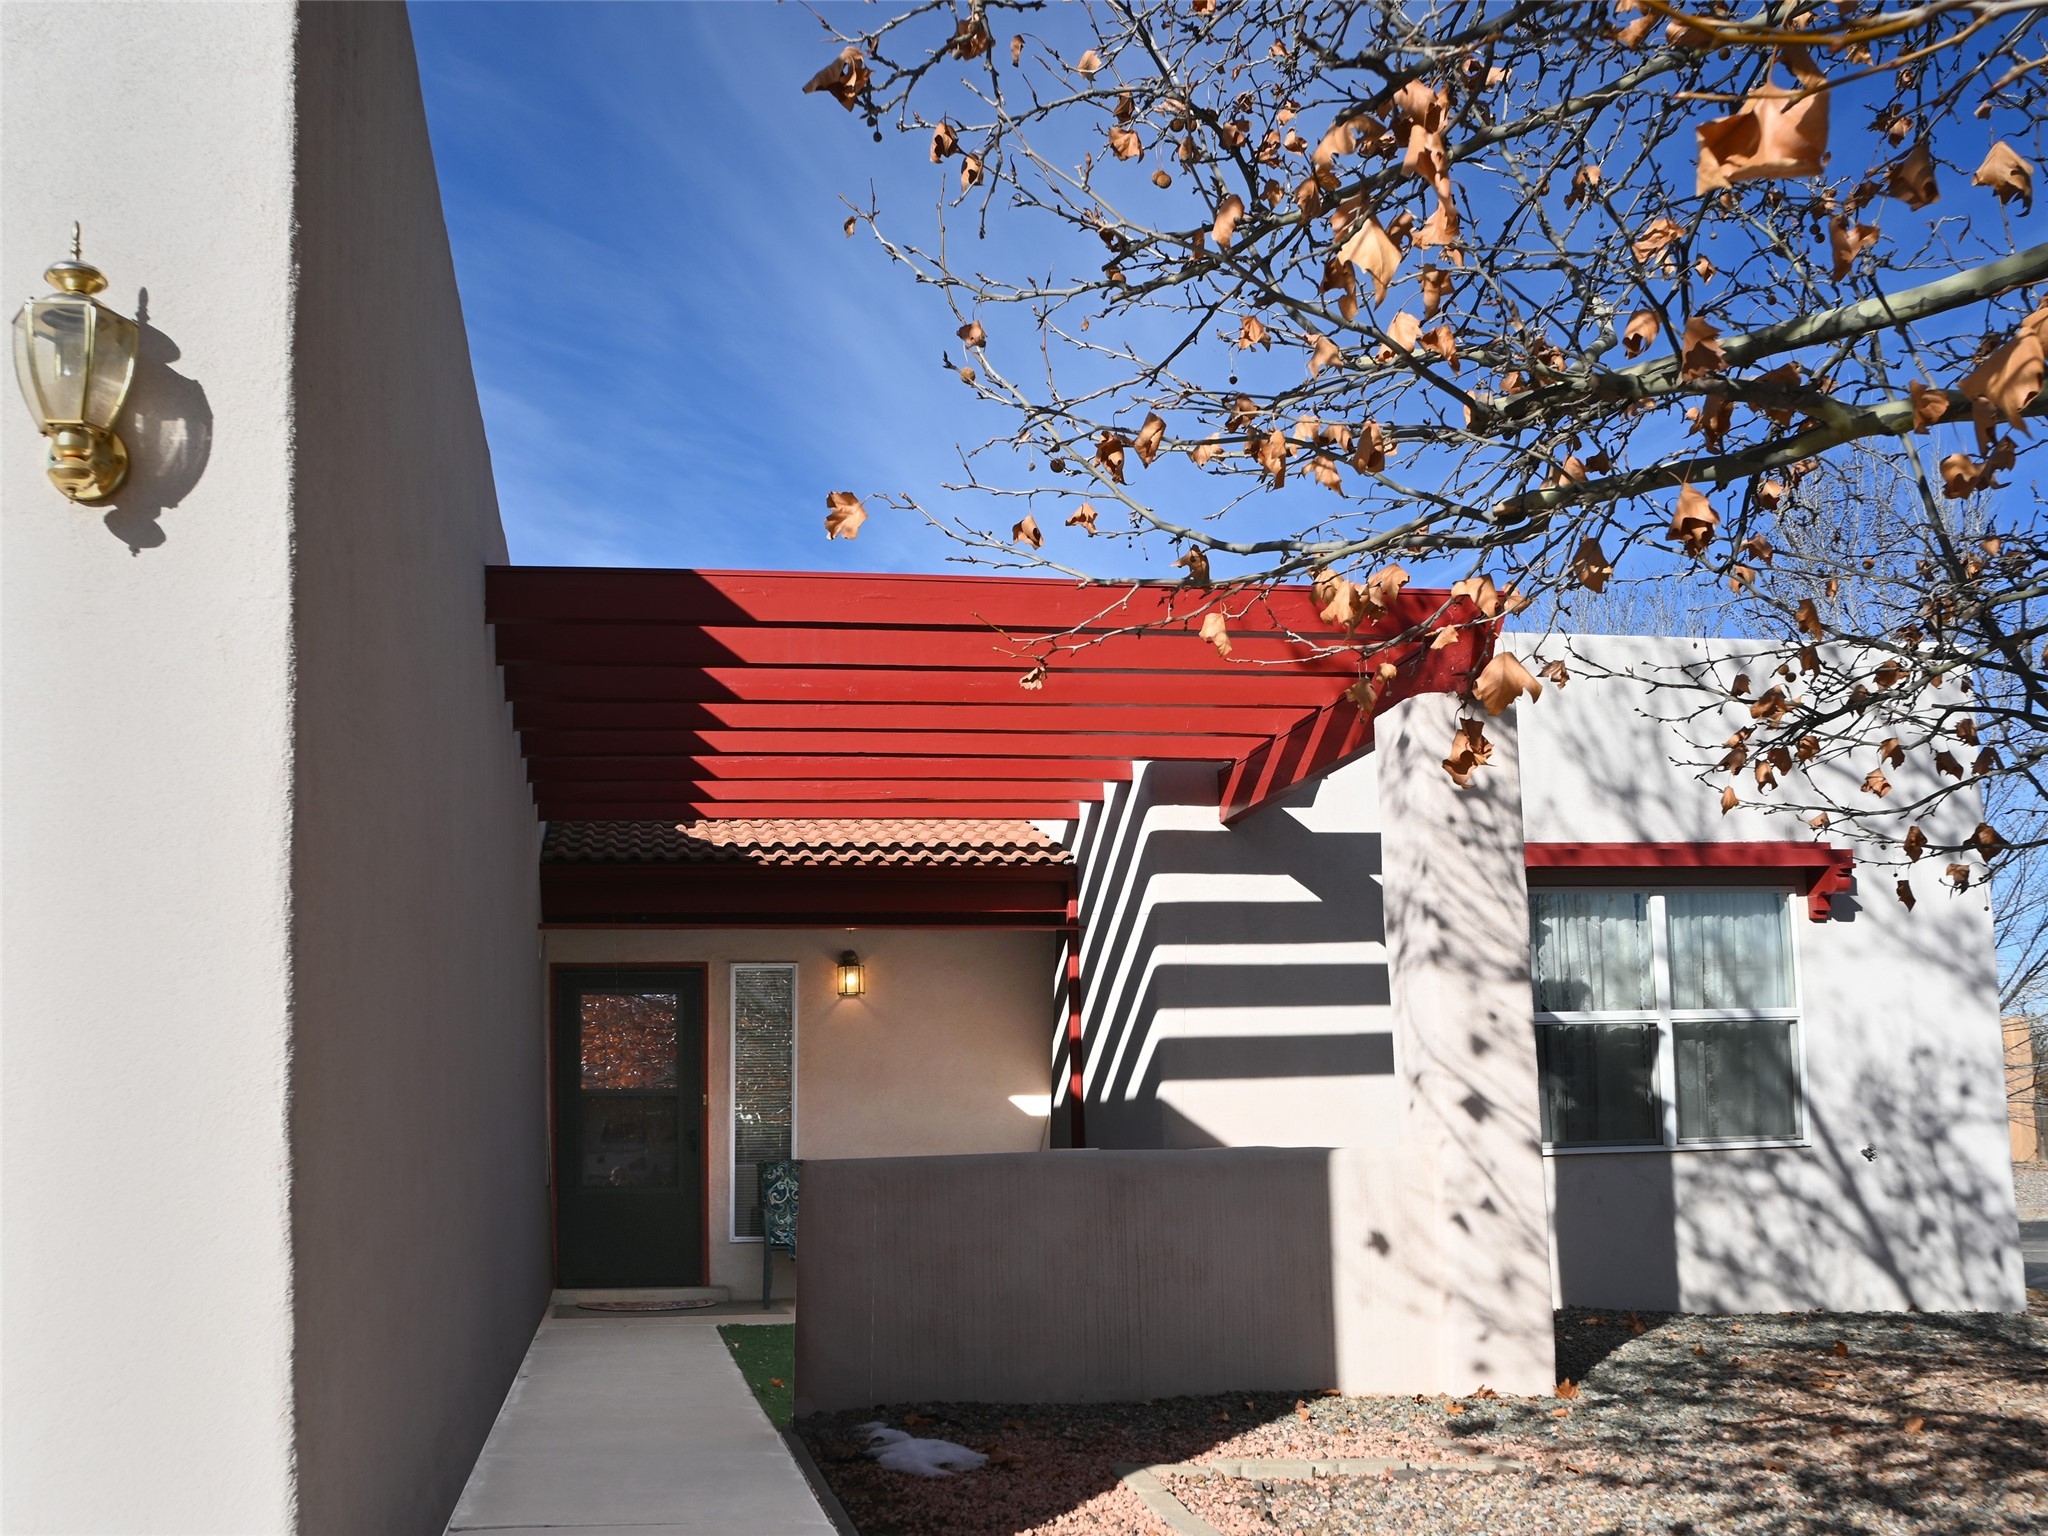 4101 Cheyenne Circle, Santa Fe, New Mexico 87507, 3 Bedrooms Bedrooms, ,2 BathroomsBathrooms,Residential,For Sale,4101 Cheyenne Circle,202400589